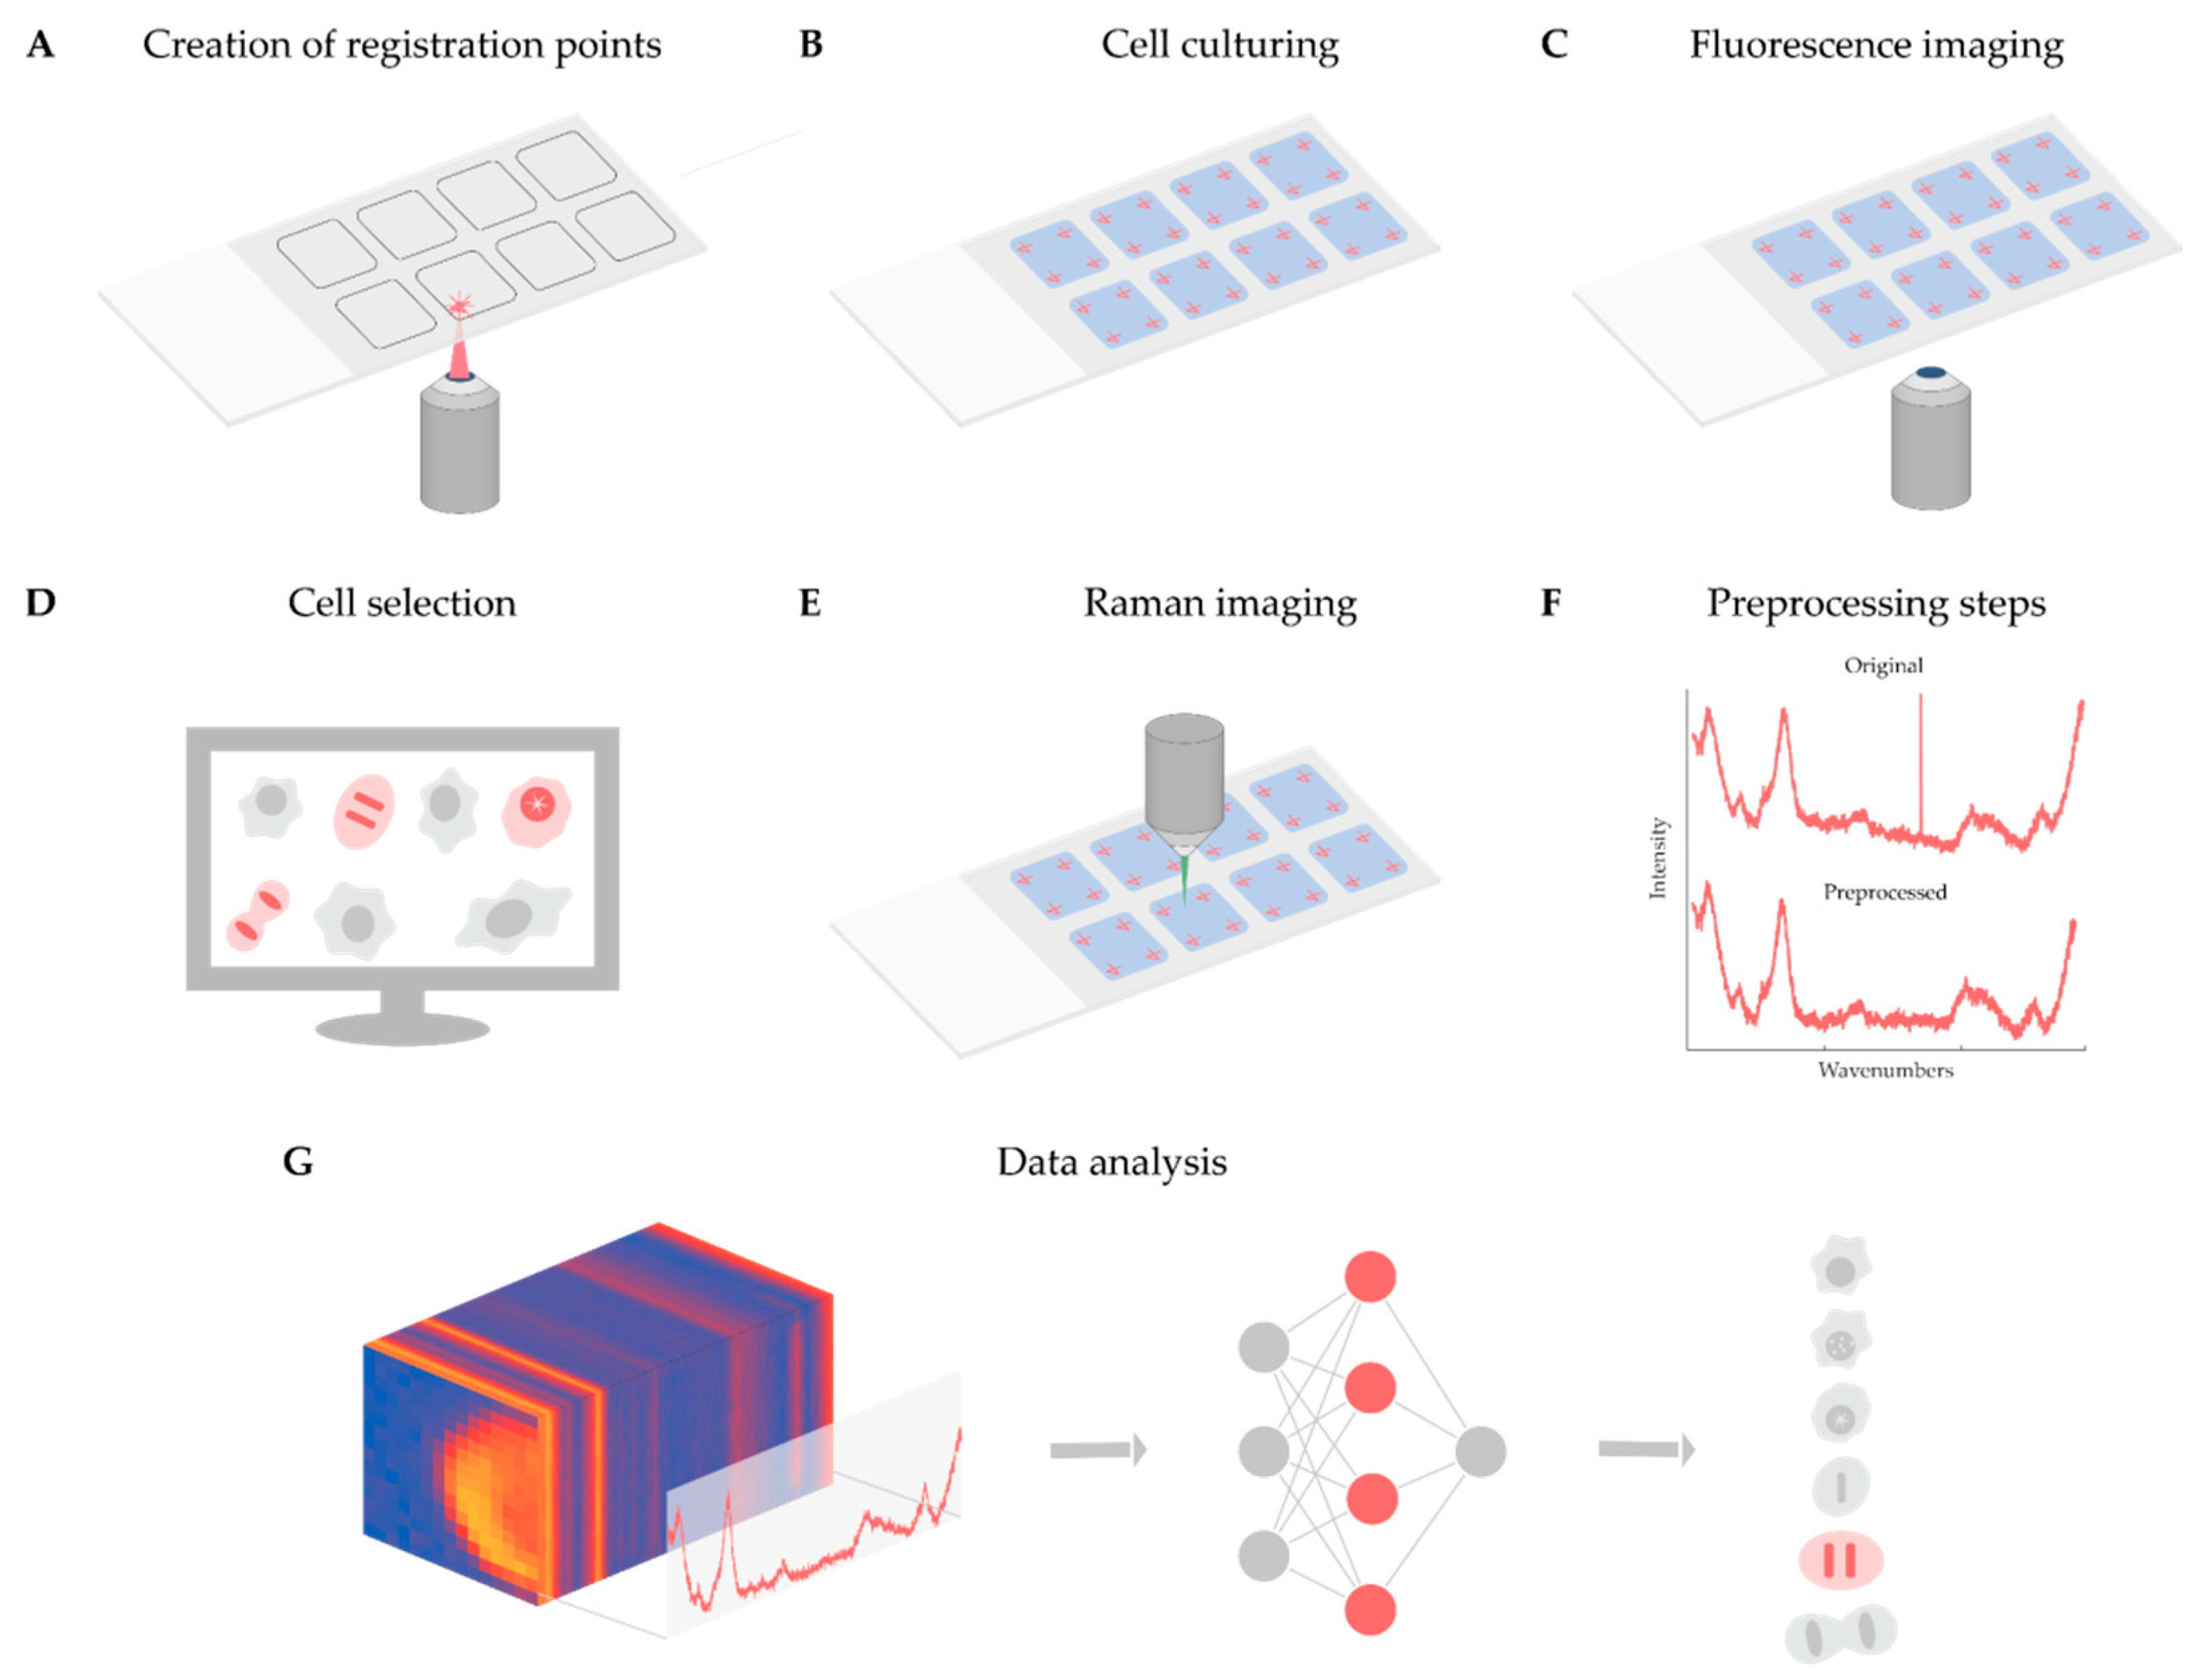 Biosensors | Free Full-Text | Correlative Fluorescence and Raman Microscopy  to Define Mitotic Stages at the Single-Cell Level: Opportunities and  Limitations in the AI Era